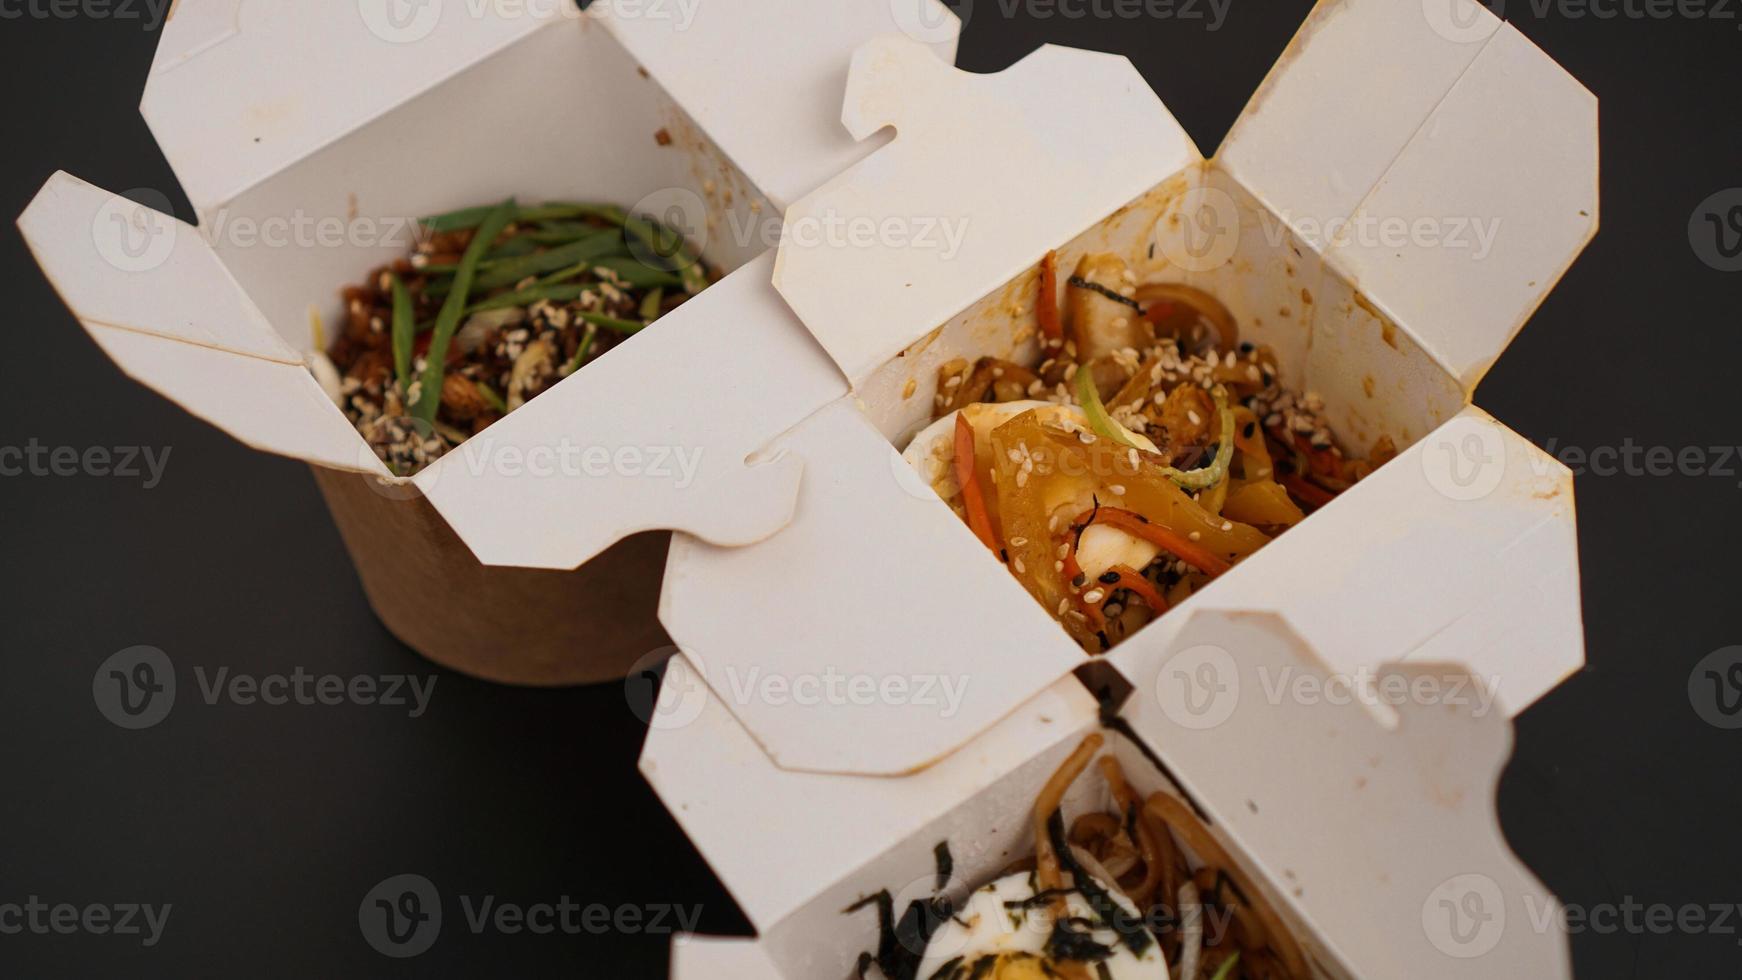 Noodles with pork and vegetables in take-out box on black table photo